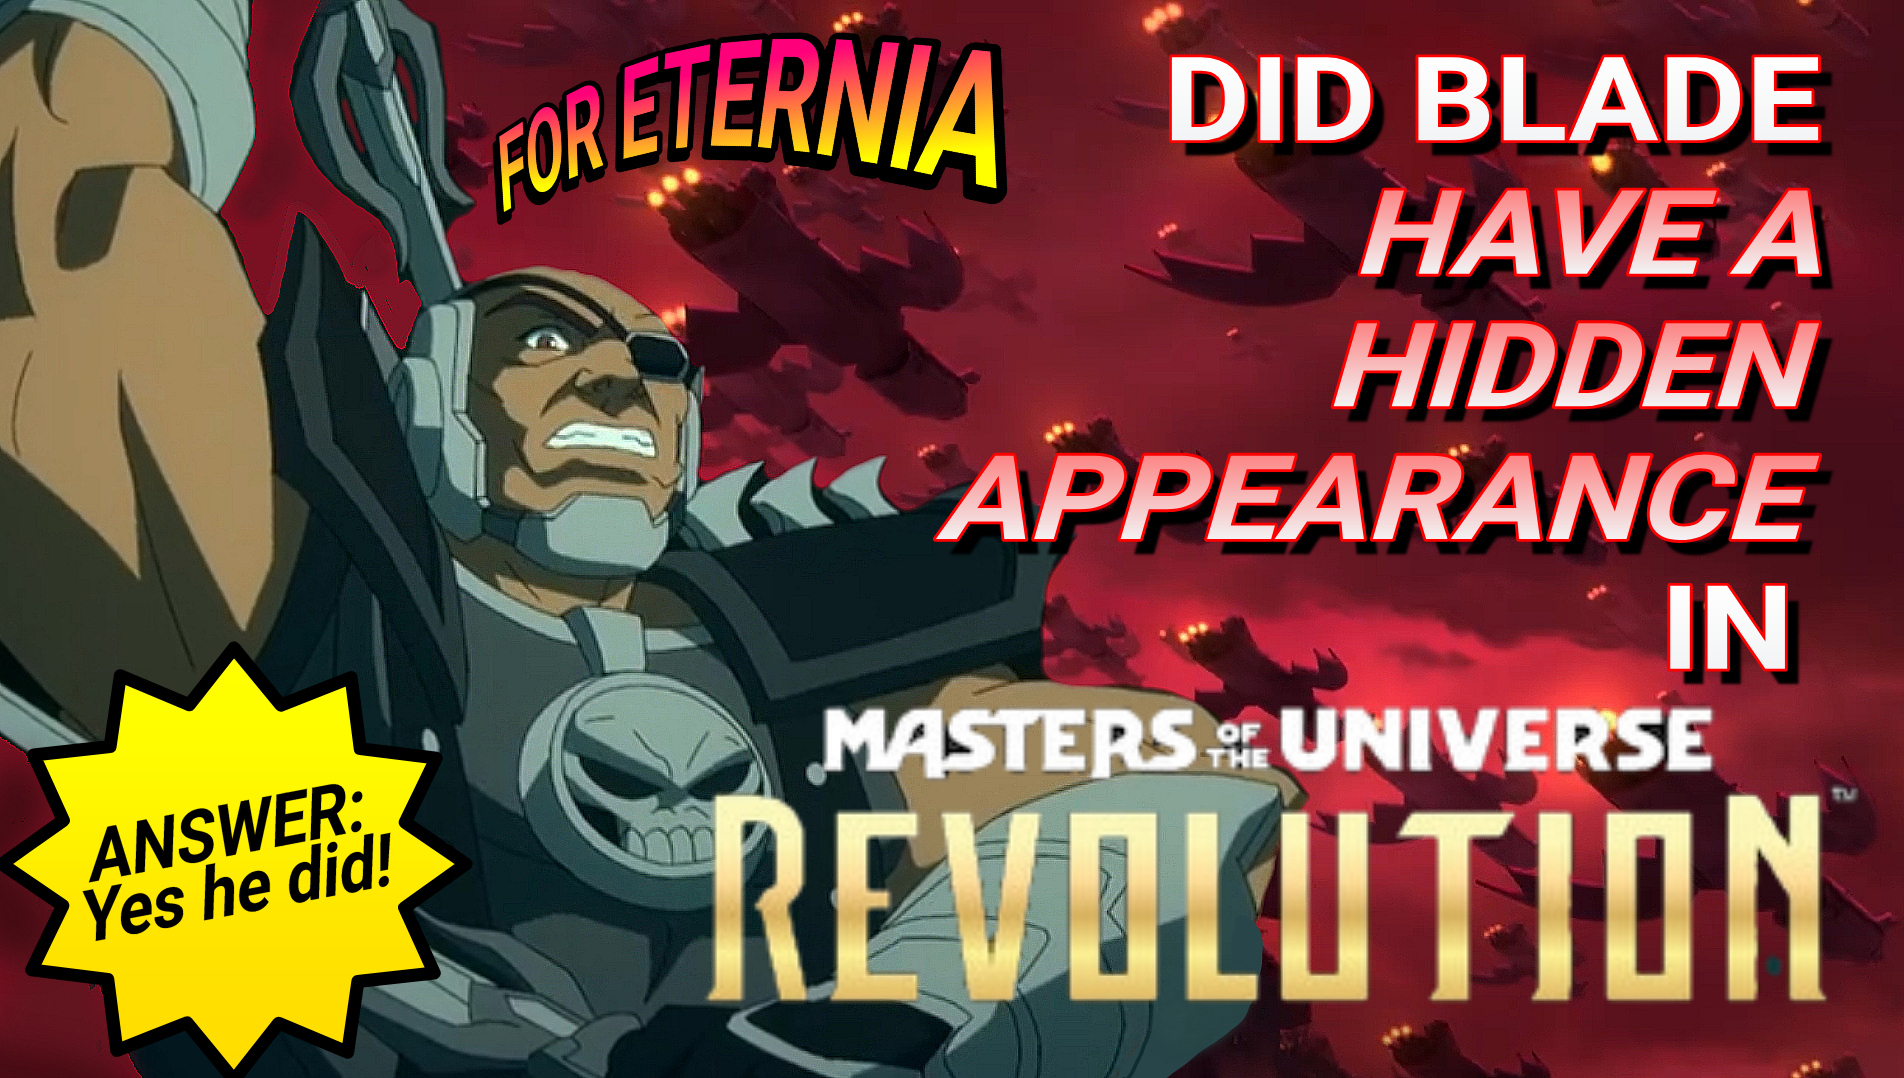 Did Blade have a hidden appearance in “Masters of the Universe: Revolution”?